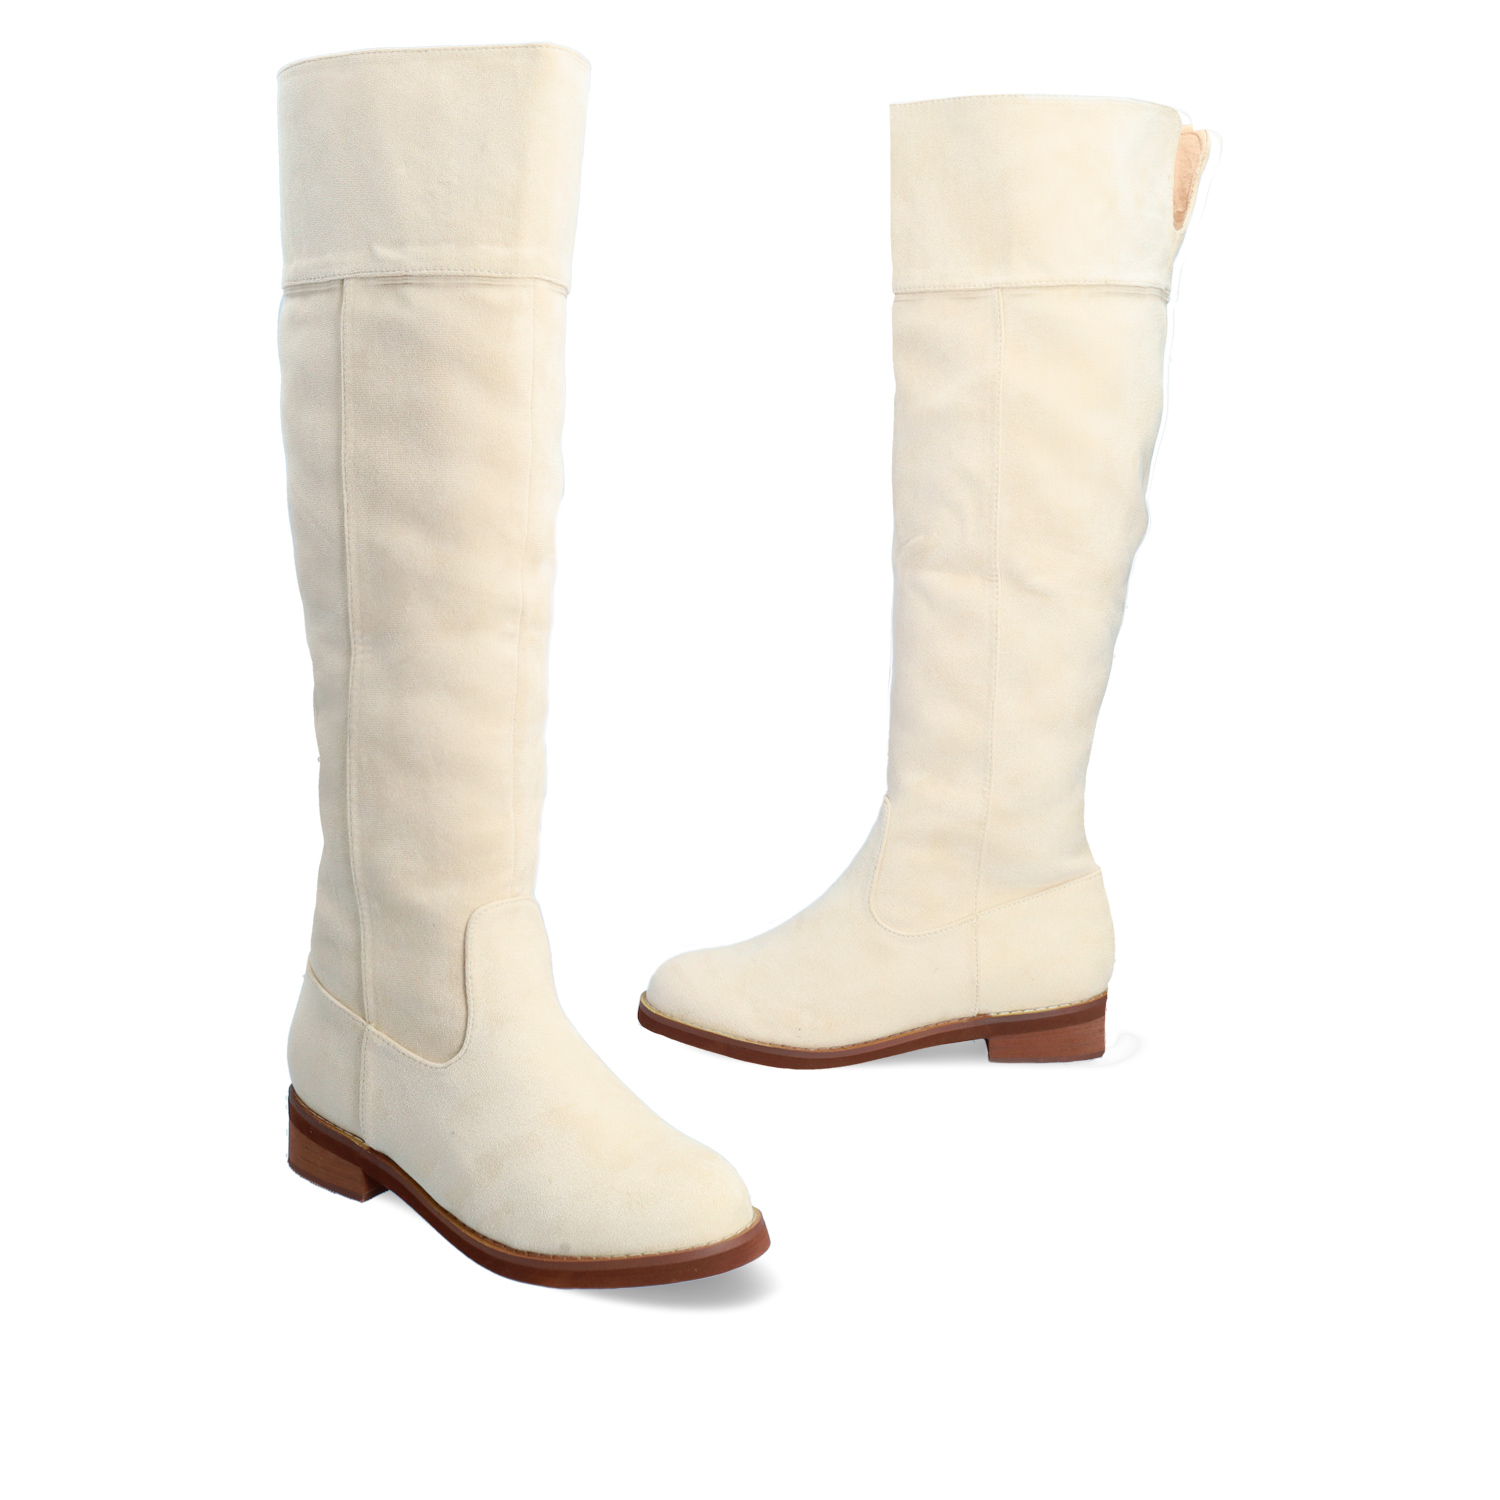 Flat knee-high boots in off-white faux suede 